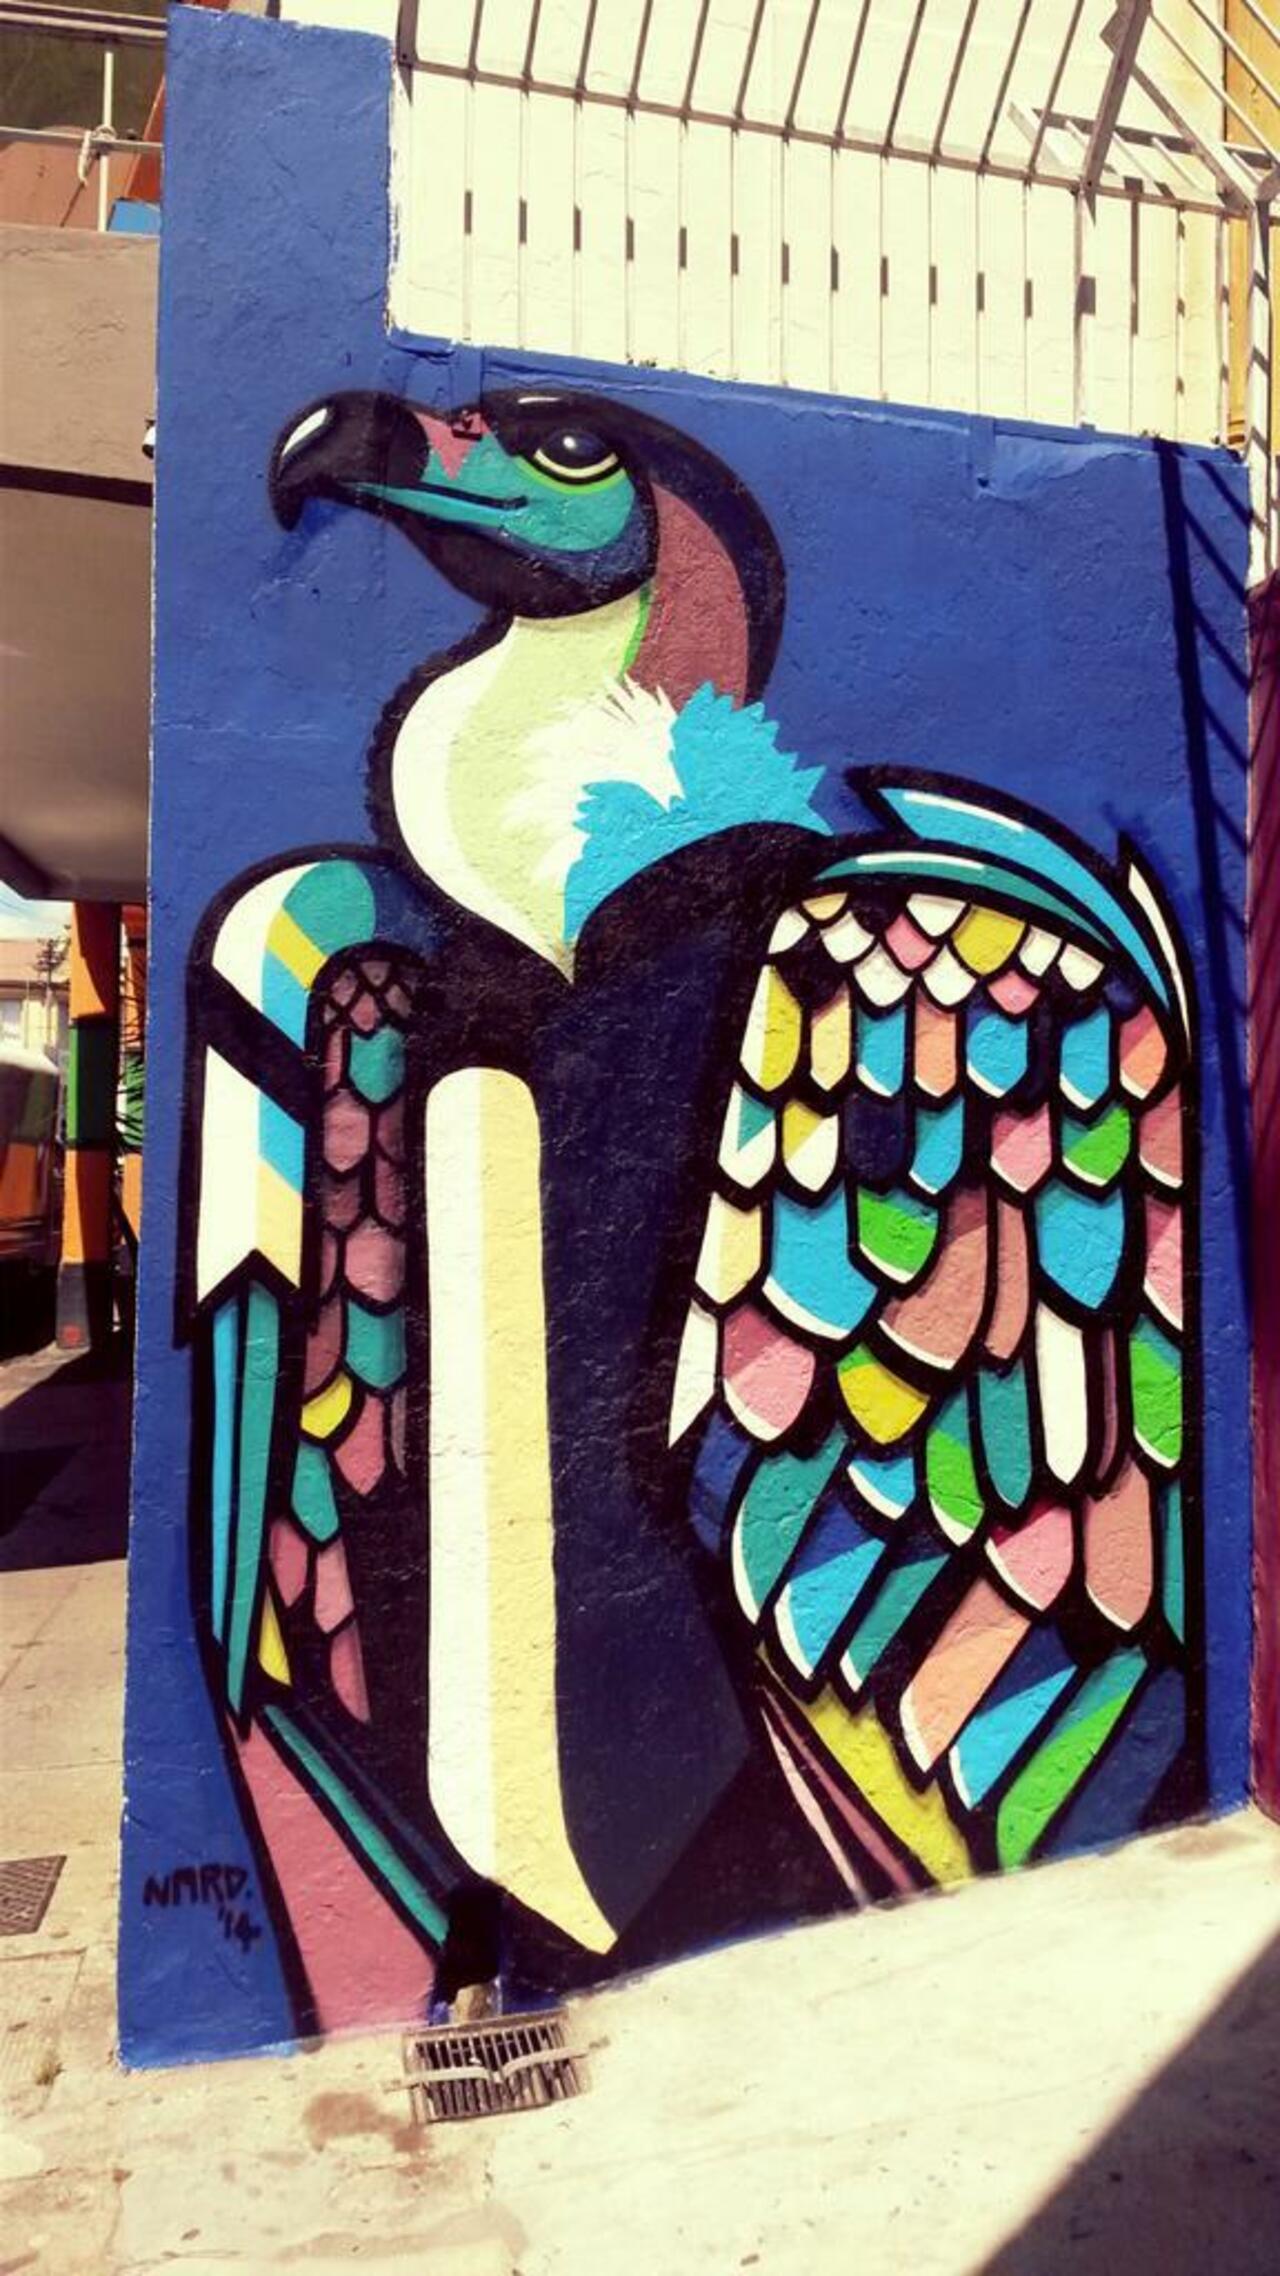 RT @nard_star: Just finished up this wall and this is the happiest vulture I've ever met. #fresh #streetart #graffiti http://t.co/KJglqD5cTa